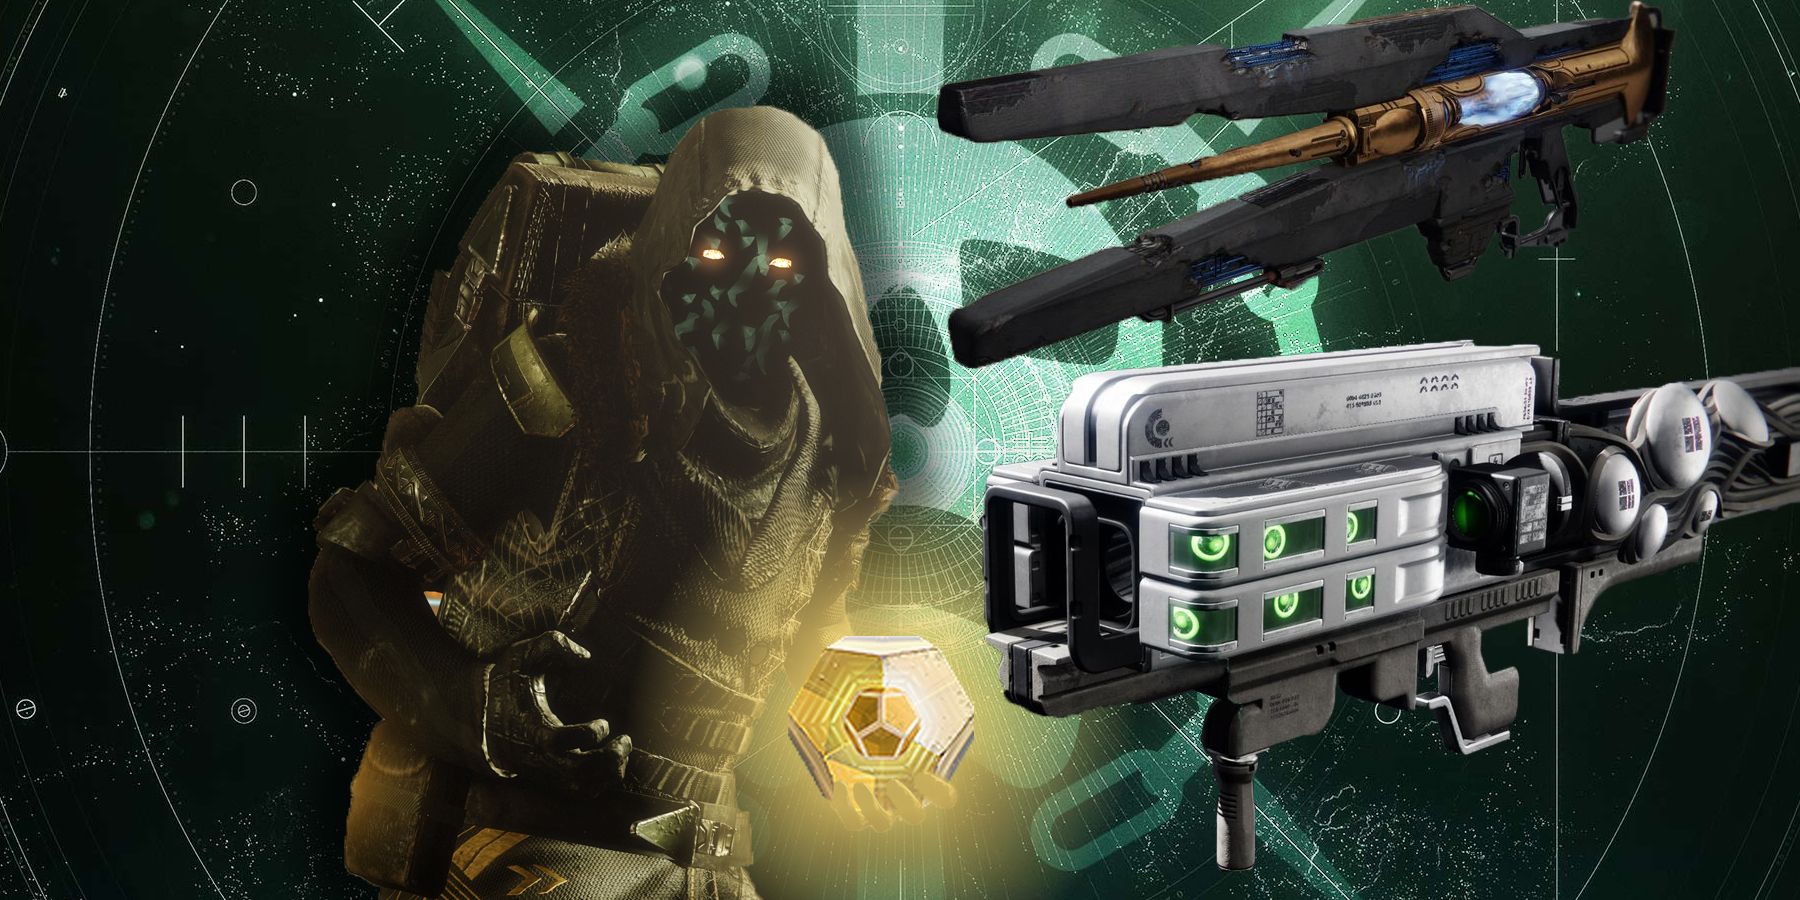 Xur holding an exotic engram from Destiny 2 with the raid weapons Divinity and Eyes of Tomorrow.